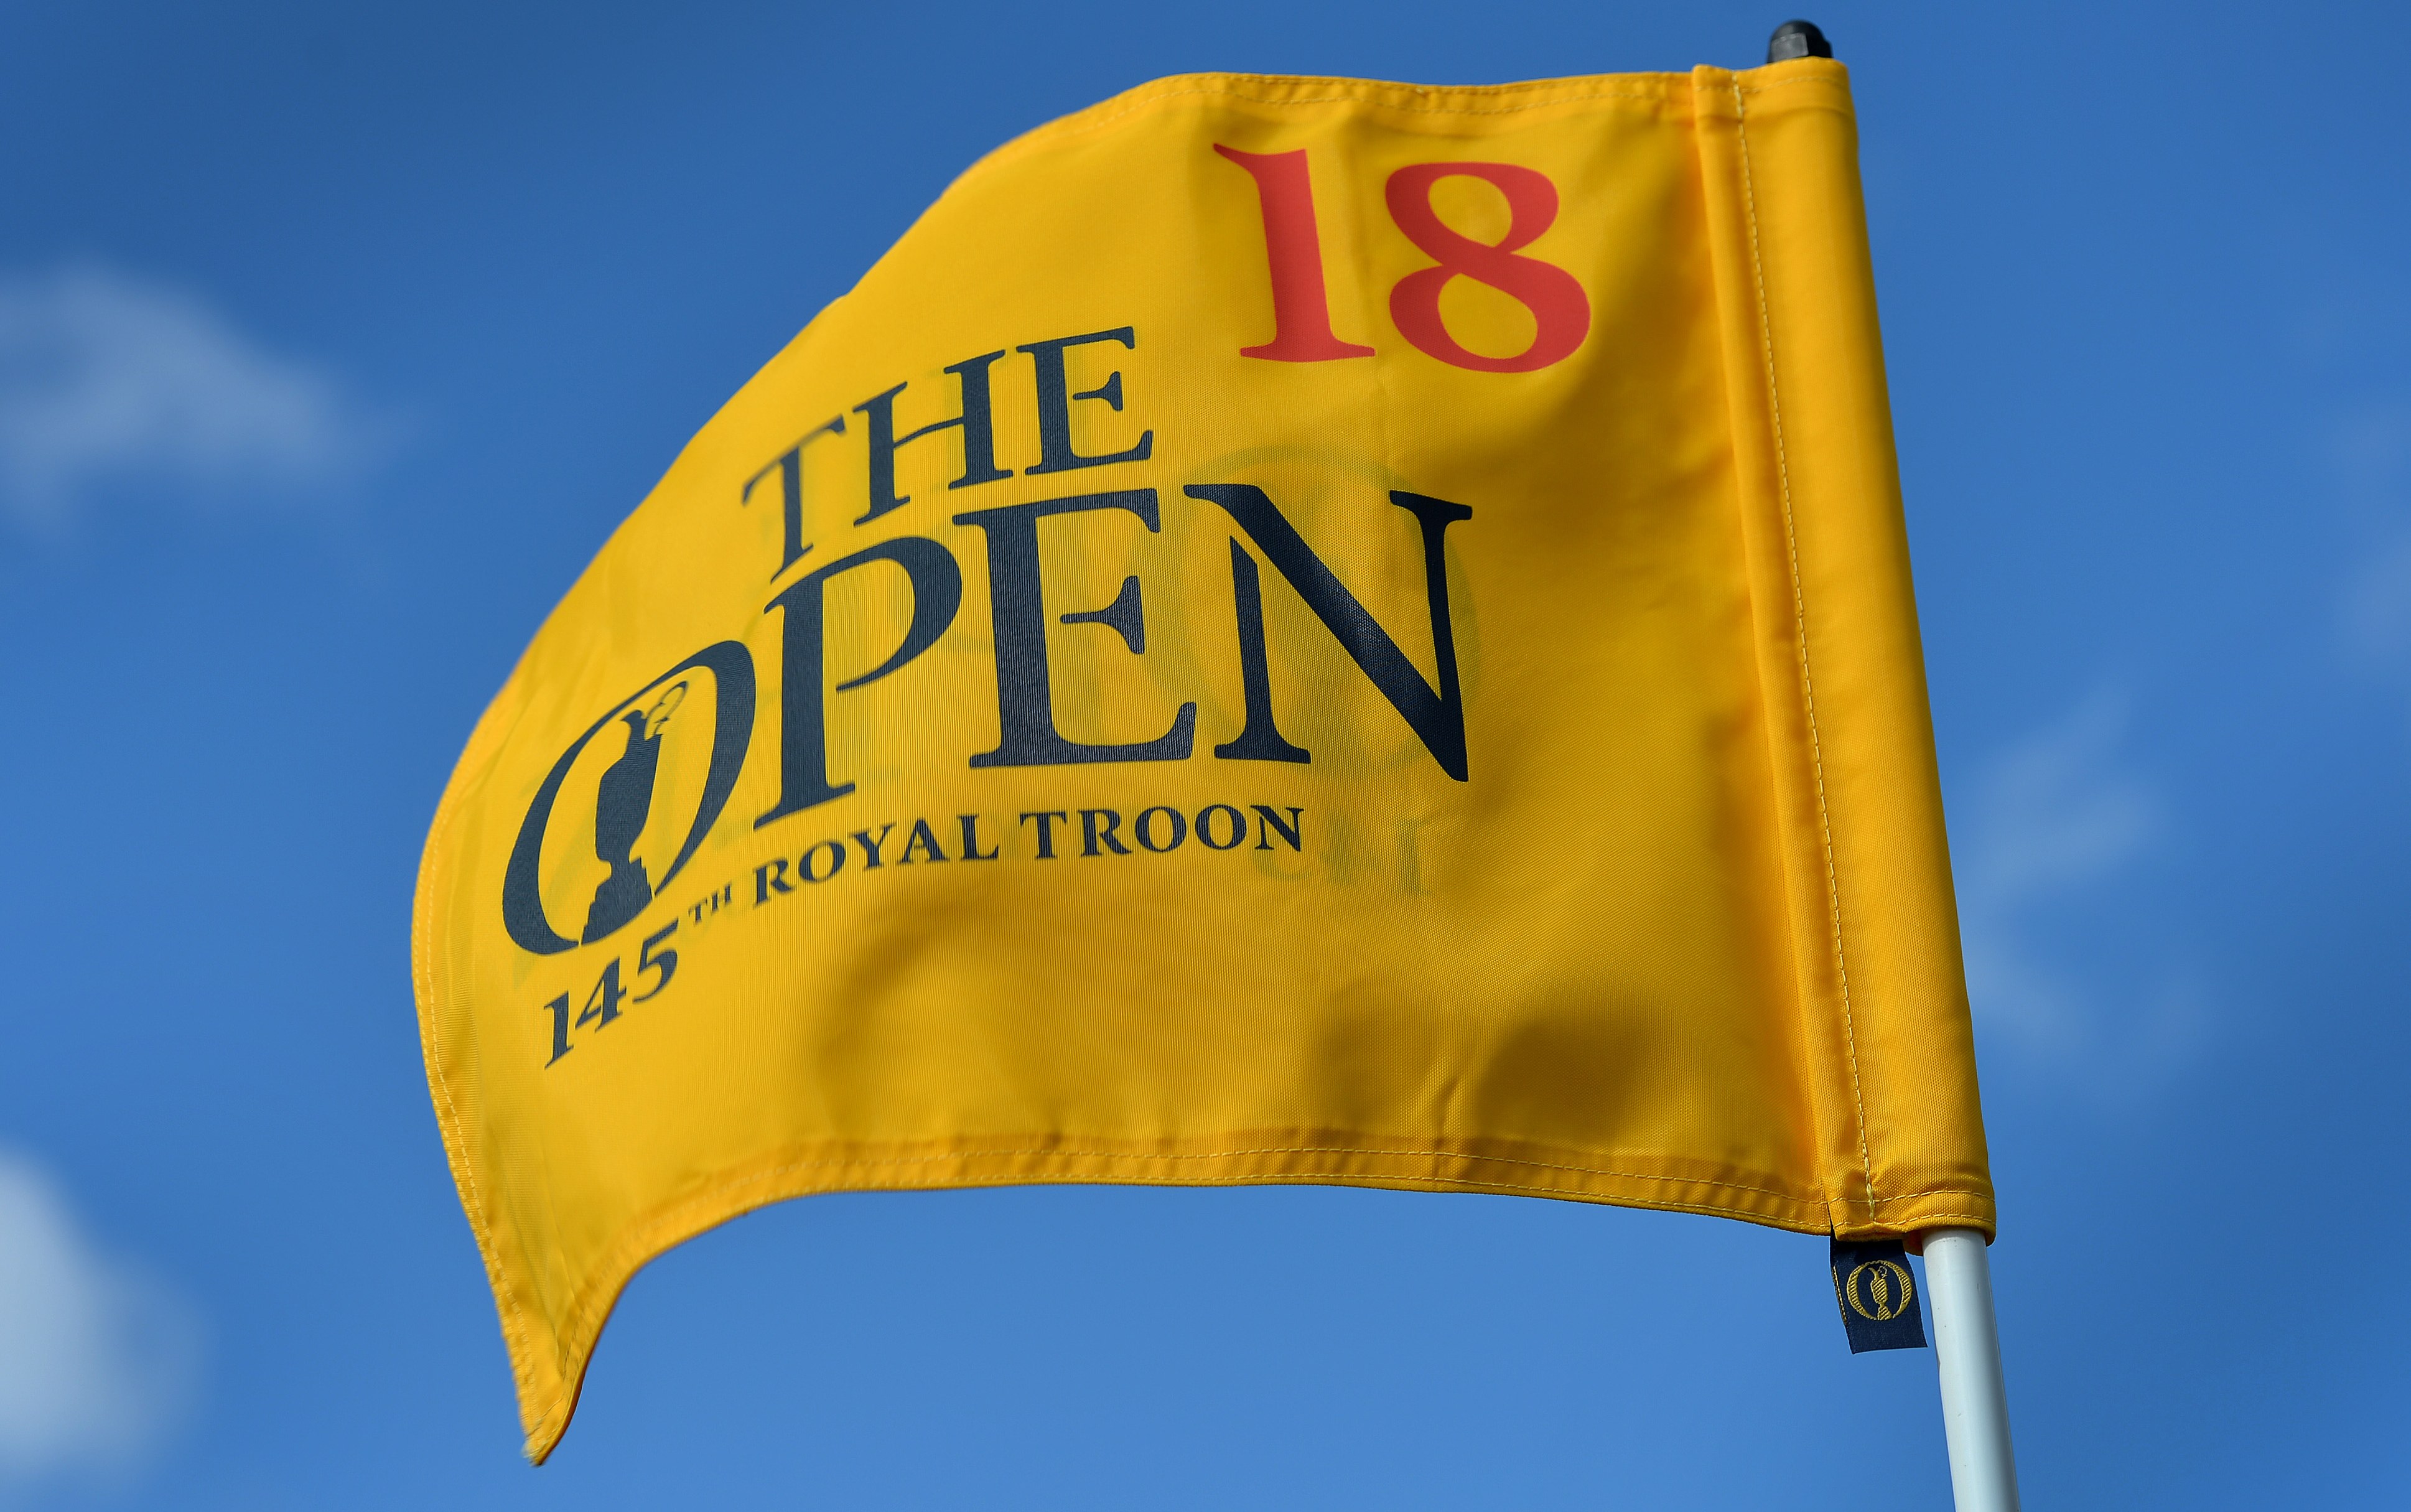 2018 British Open Championship current betting odds and favorites